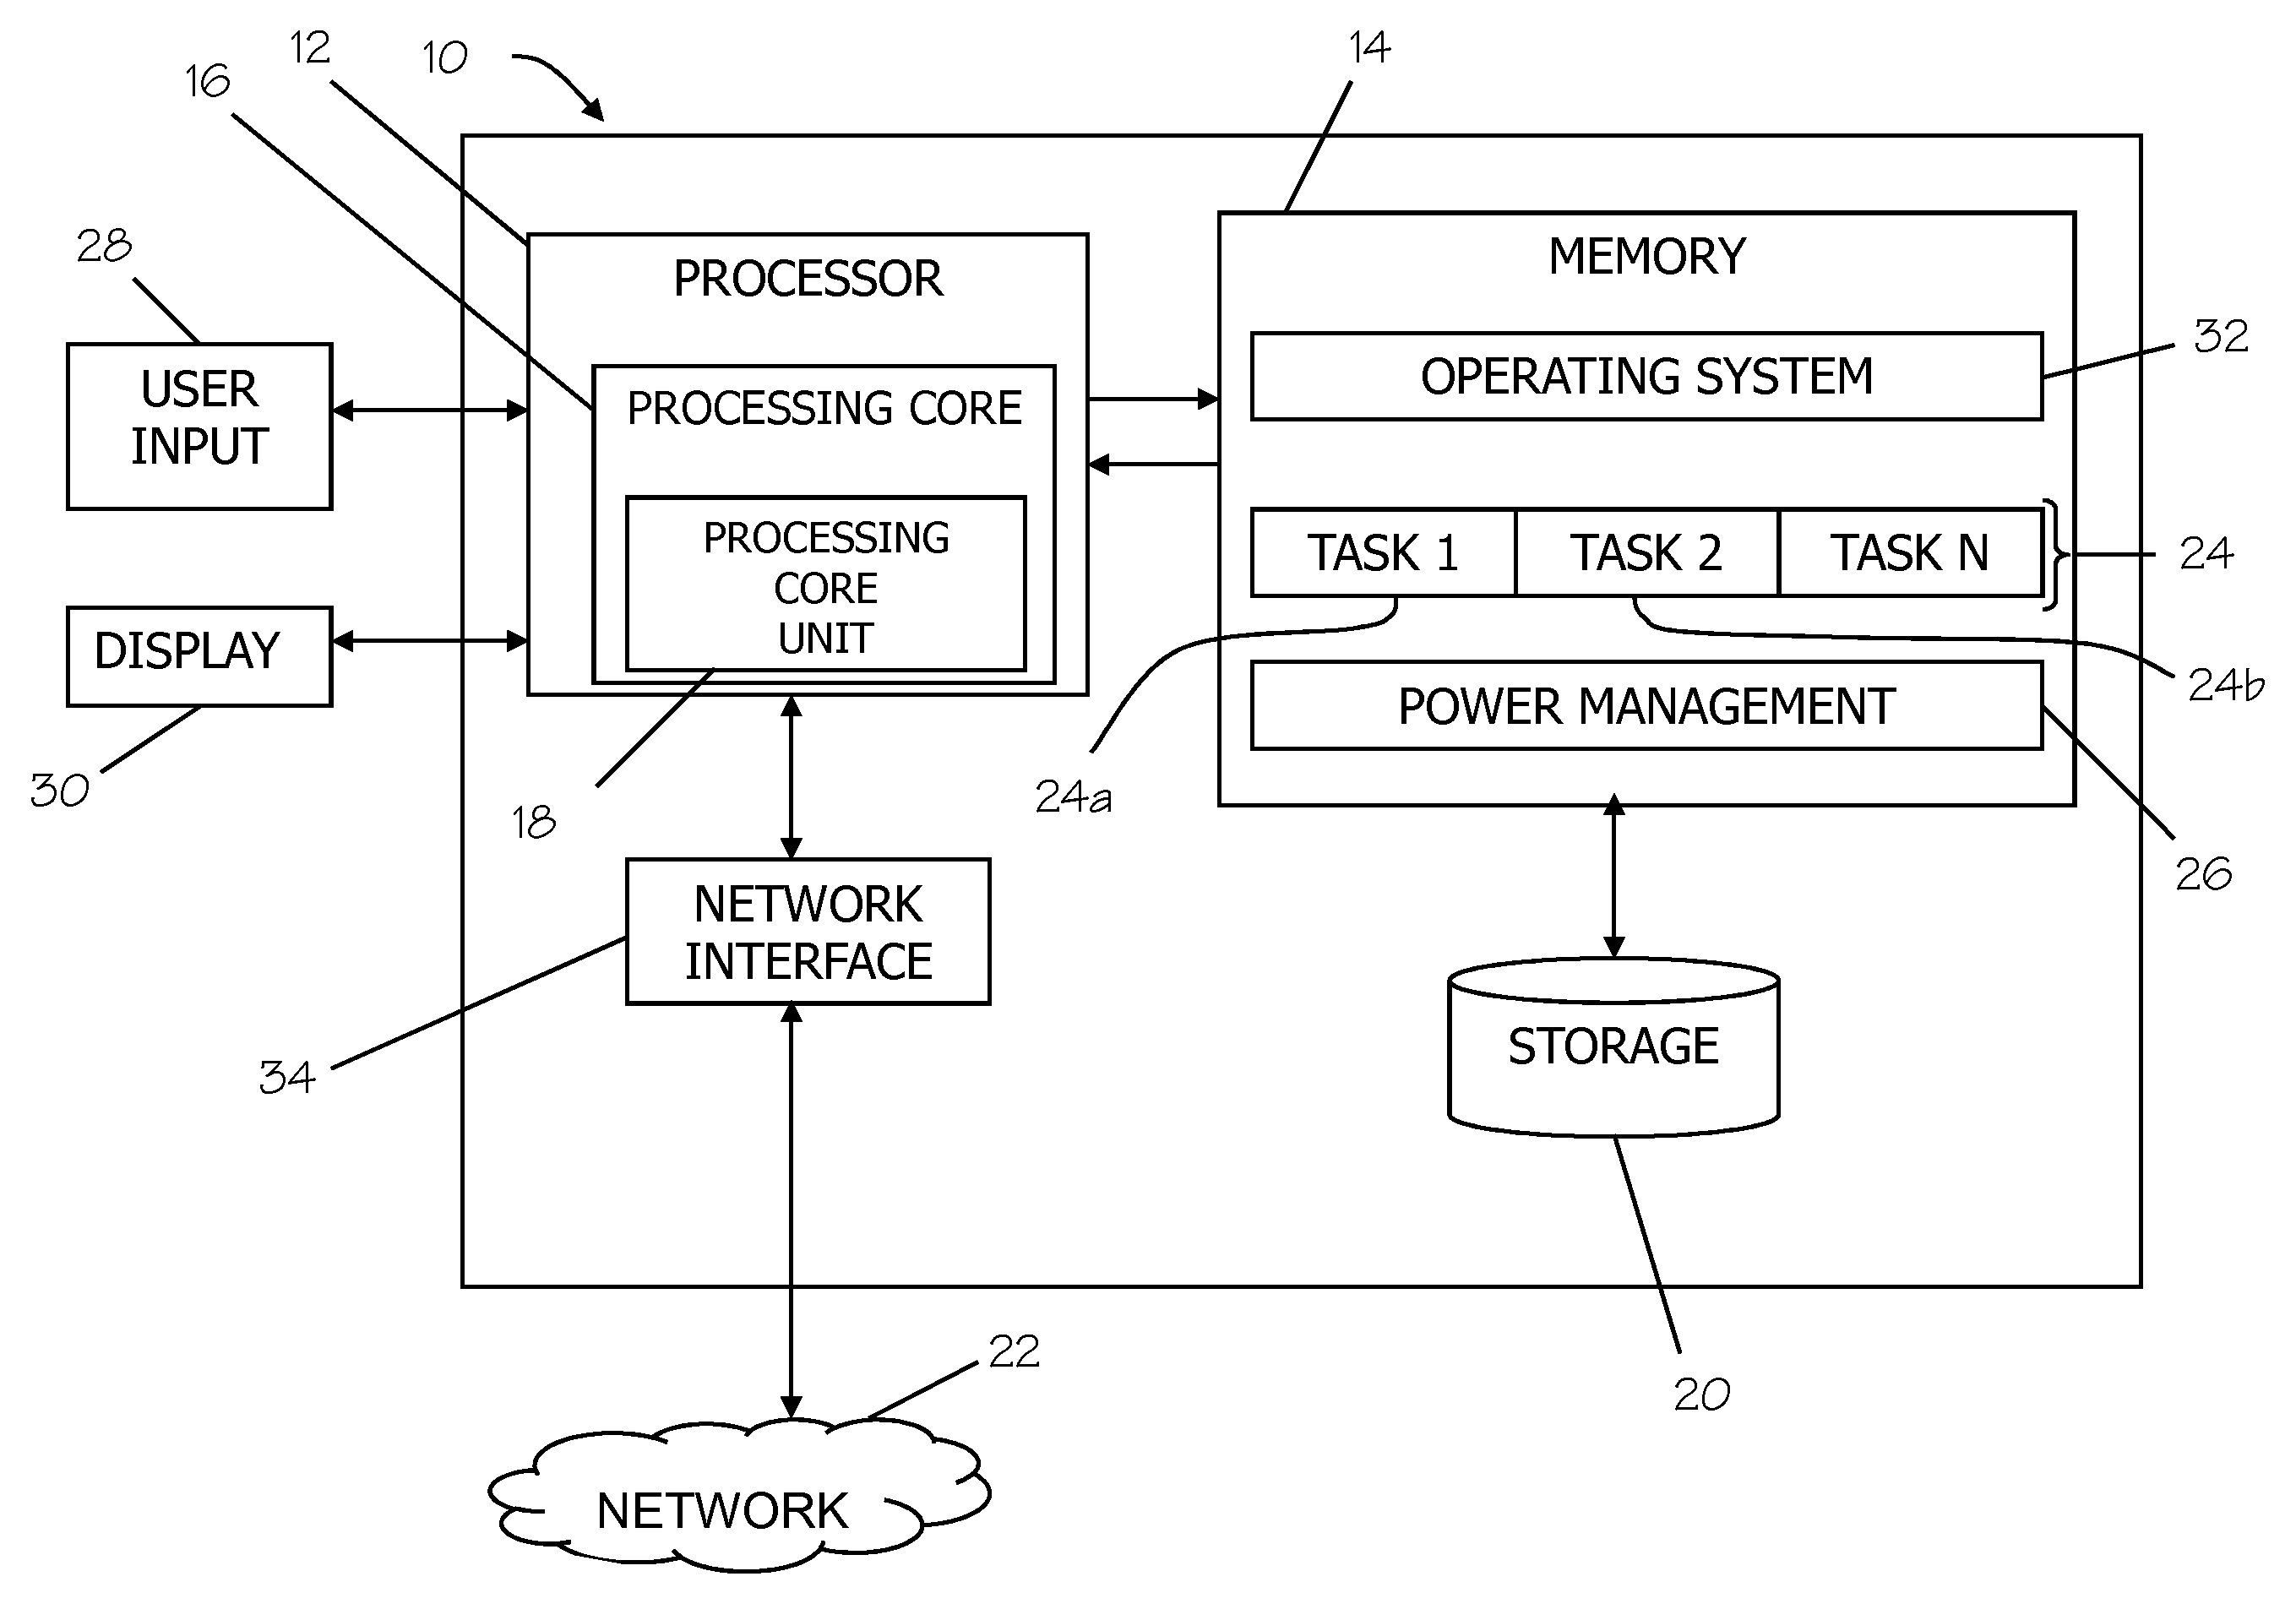 Computer System Power Management Based on Task Criticality